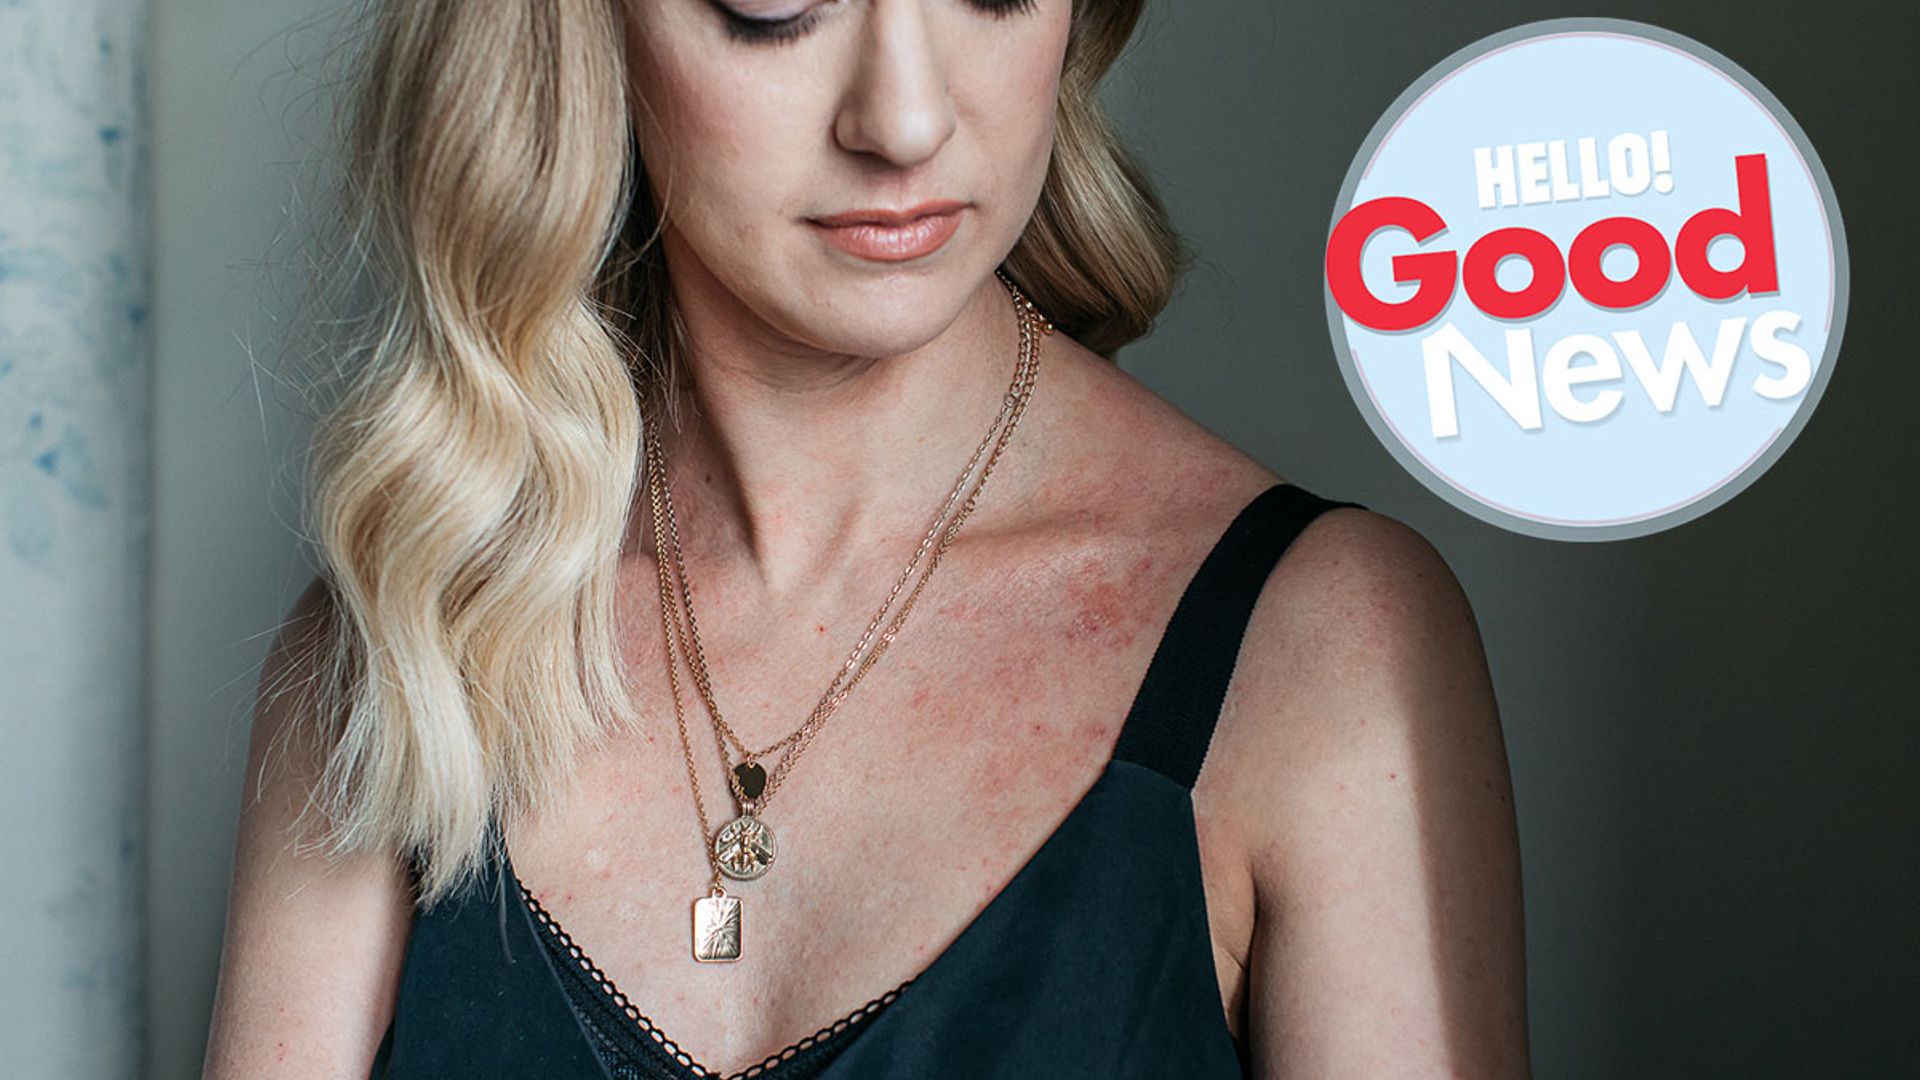 Skincare brand launches new ad campaign showing models with eczema